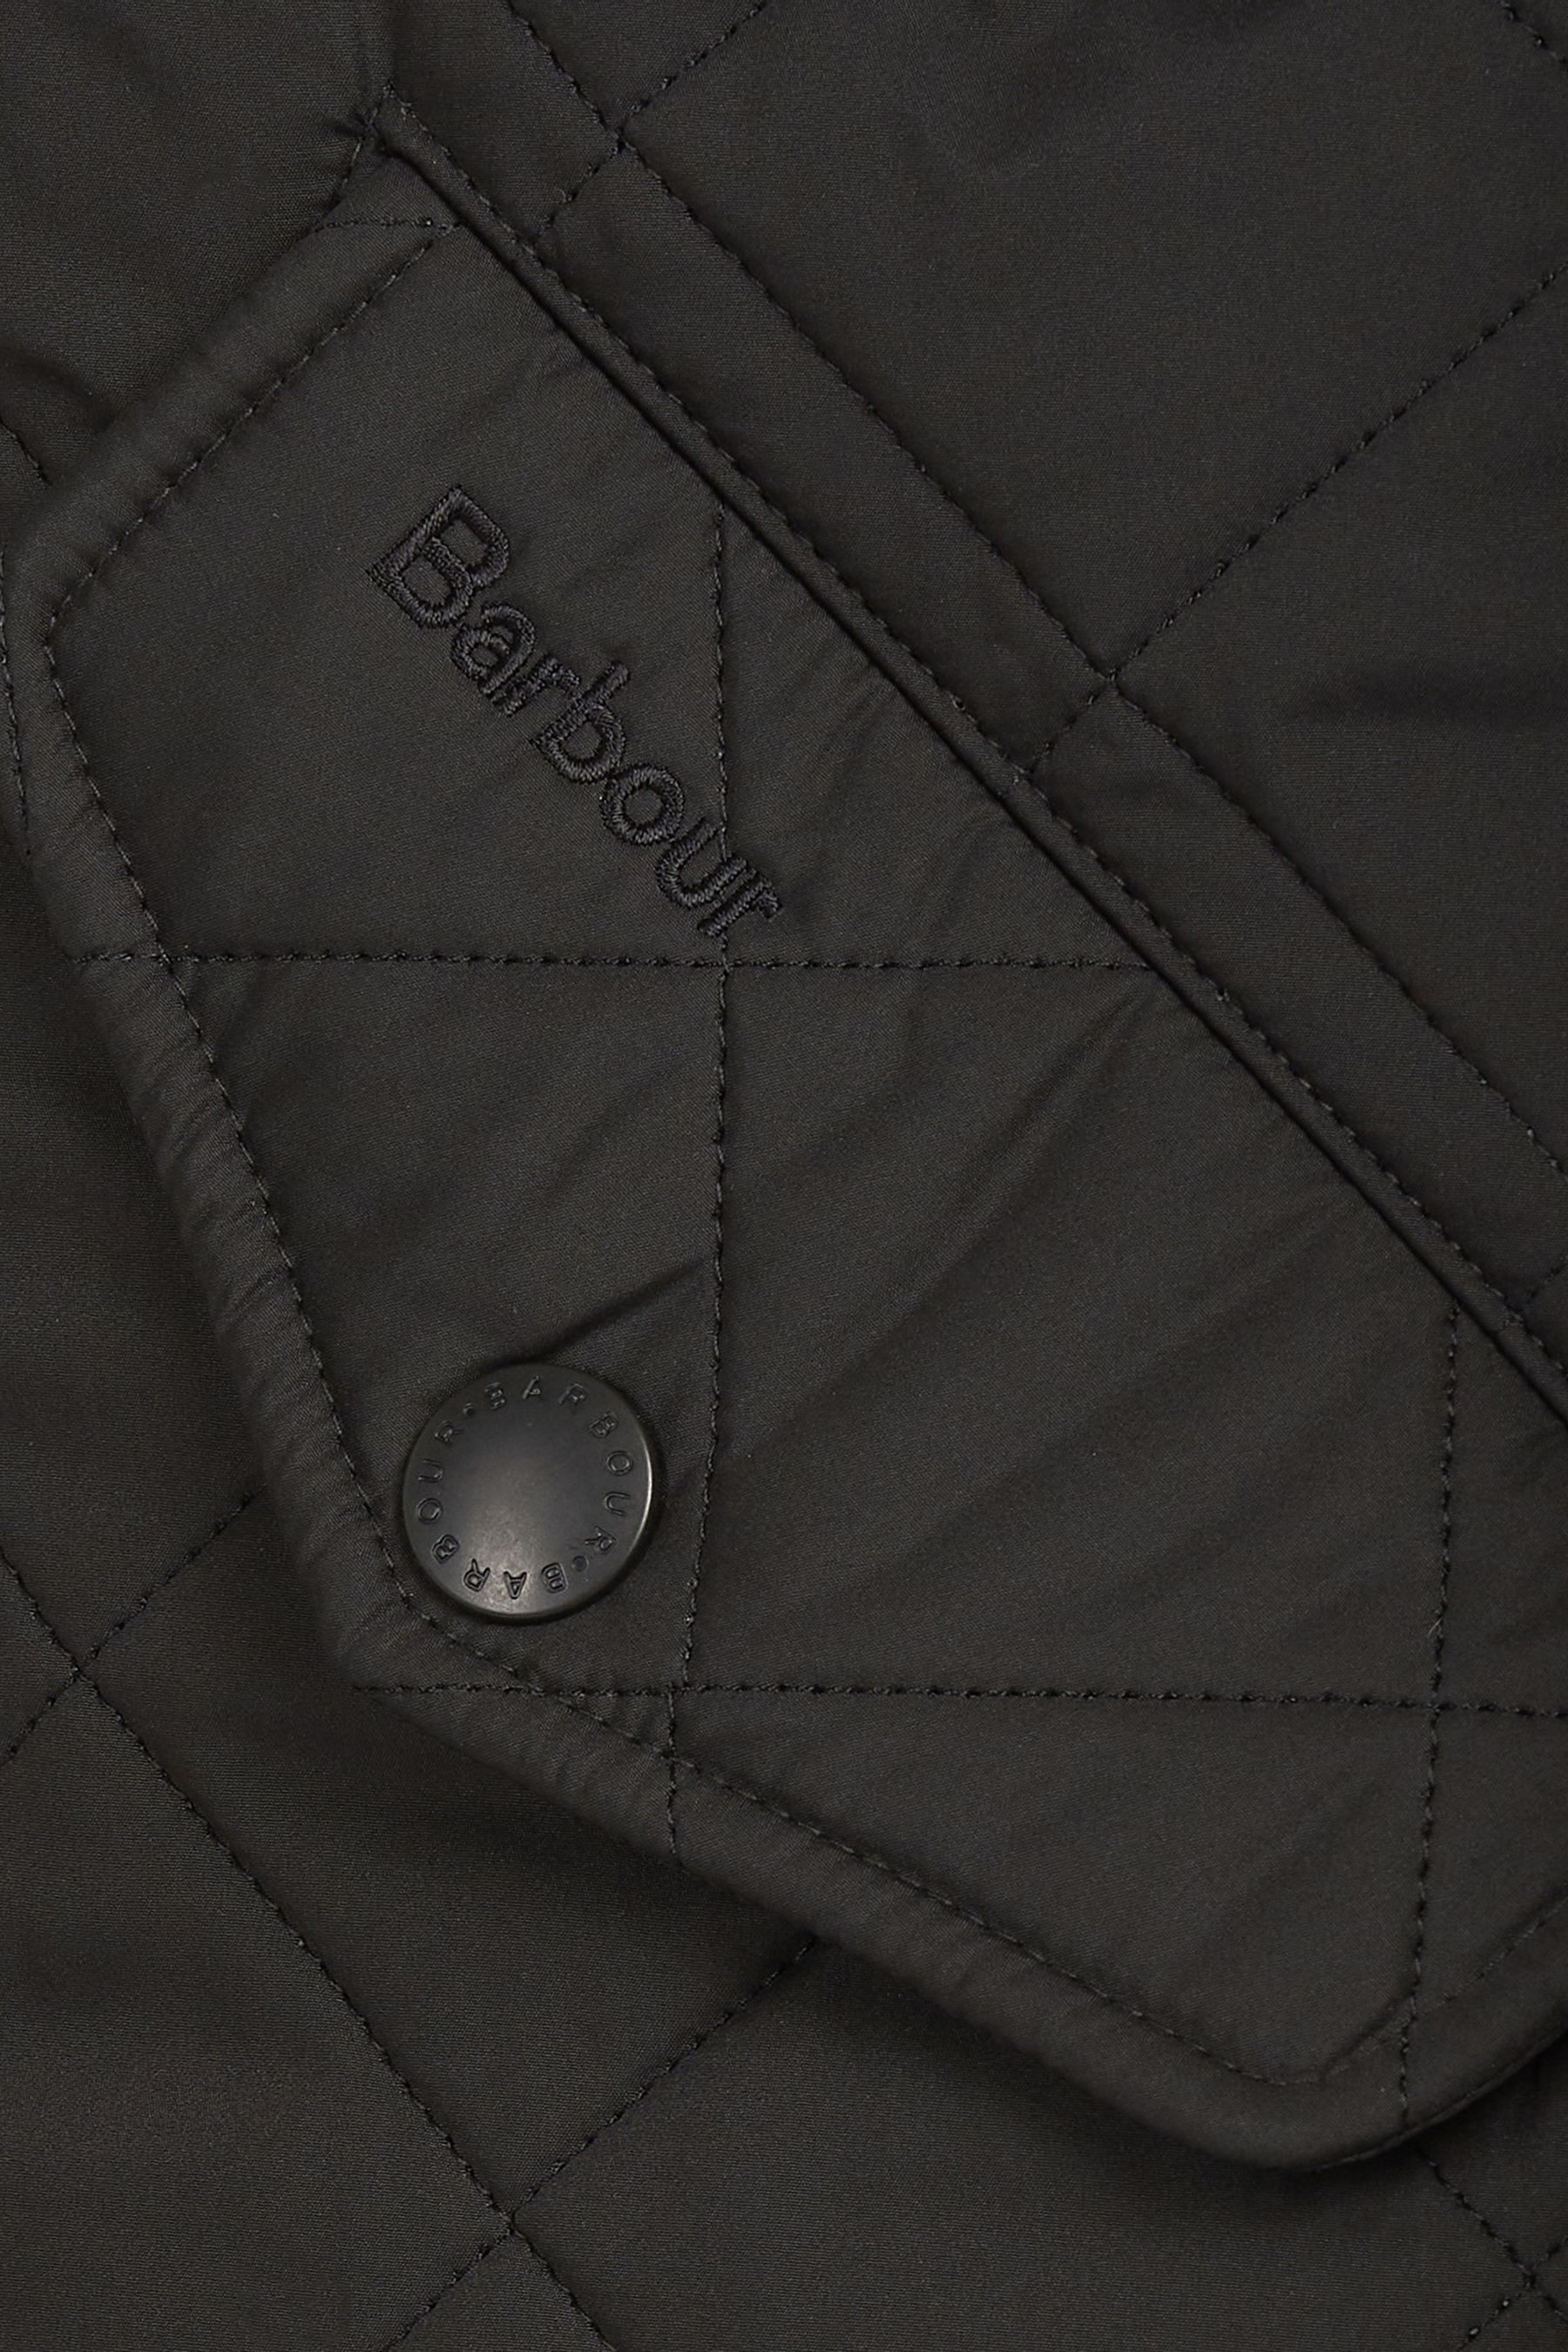 Barbour® Powell Quilted Jacket